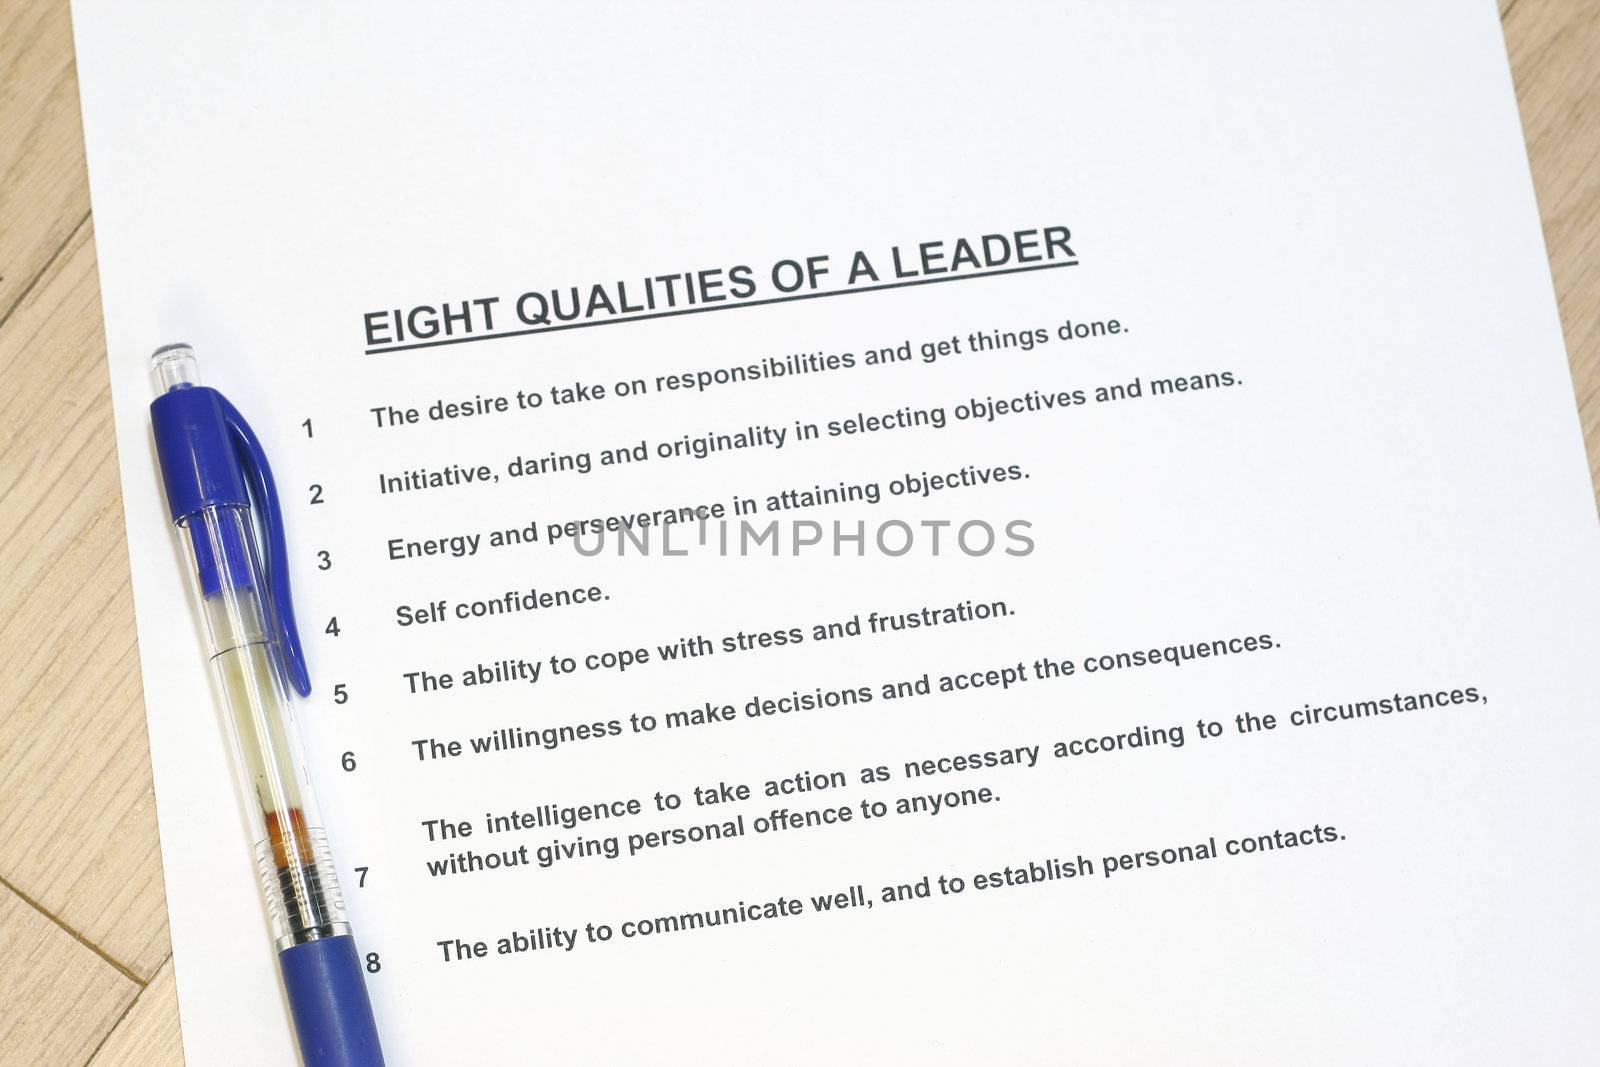 Eight qualities of a leader concept listed with a pen